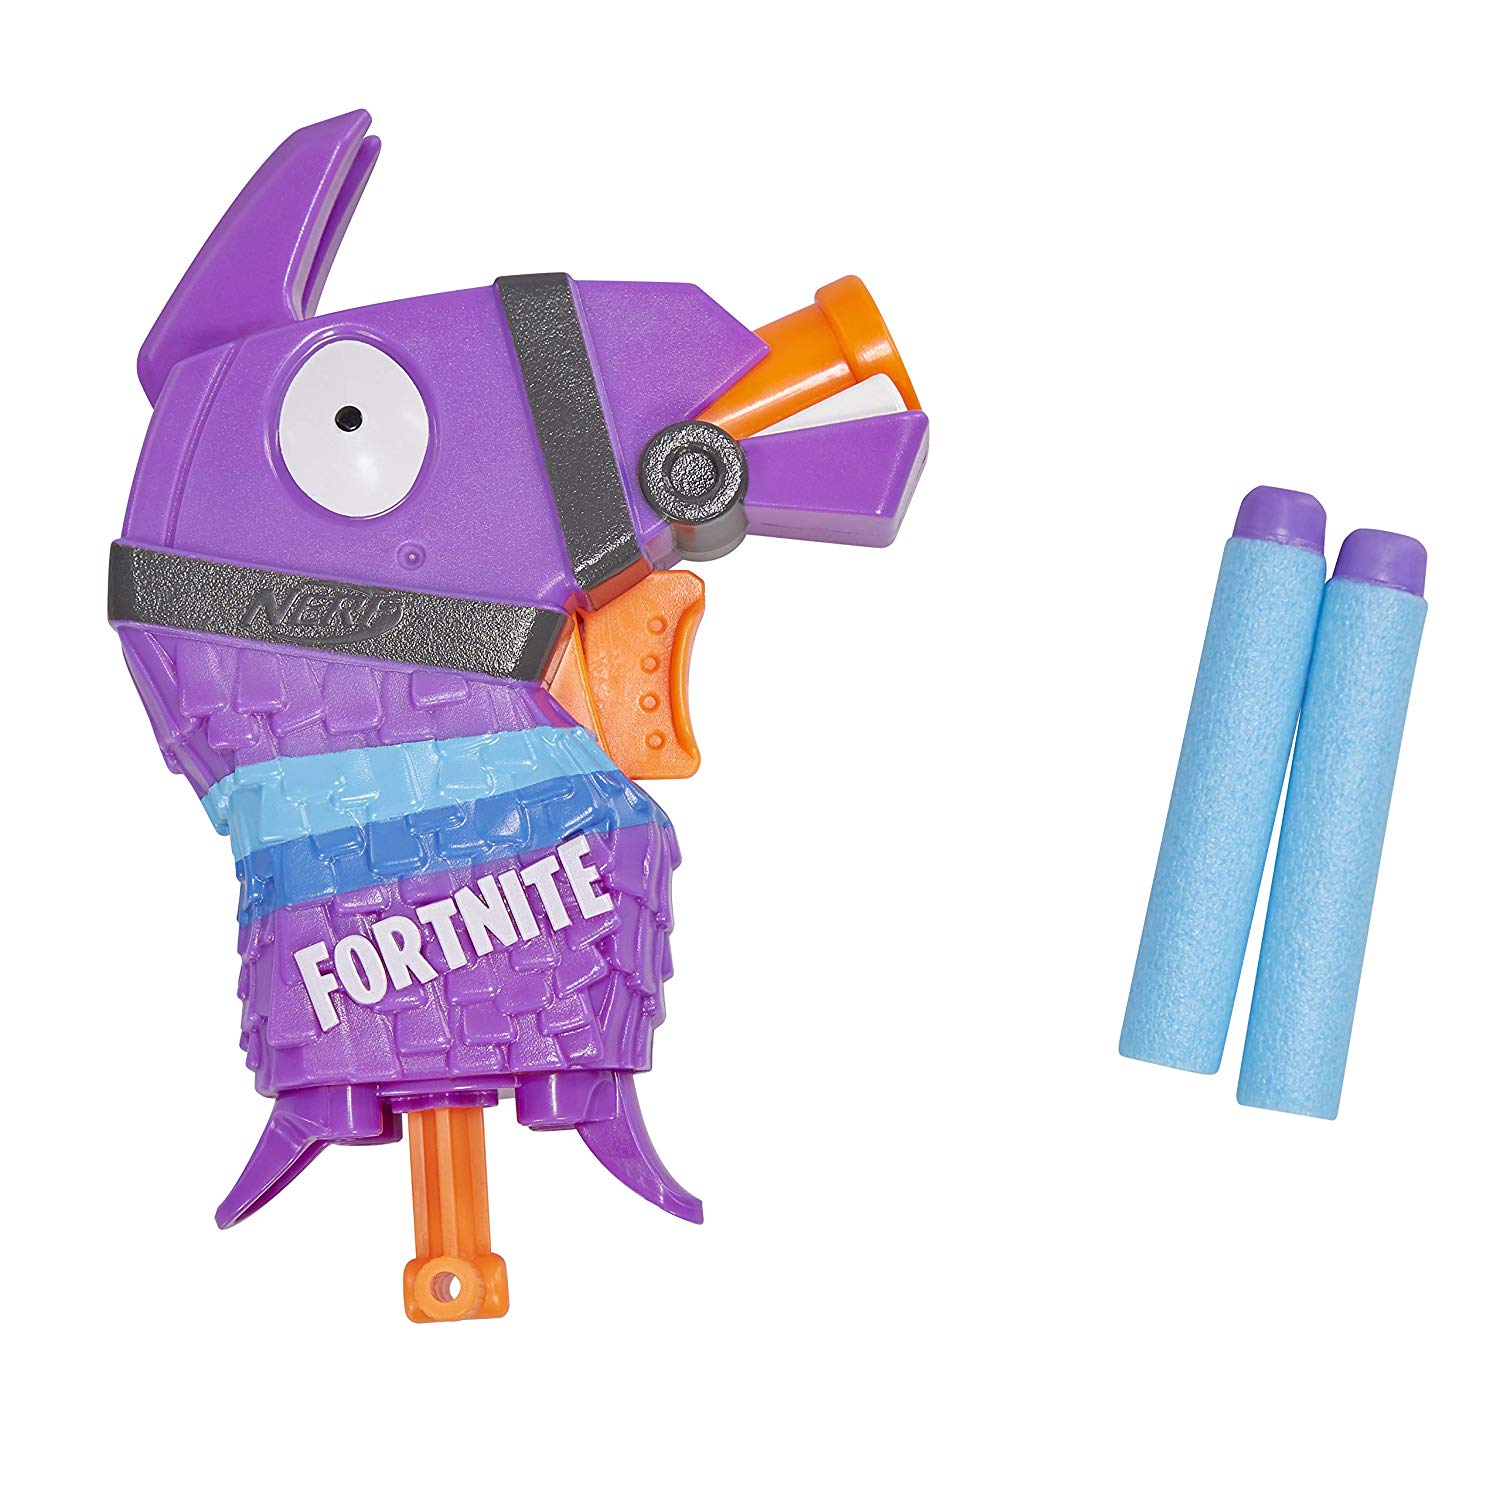  - for!   tnite llama front view